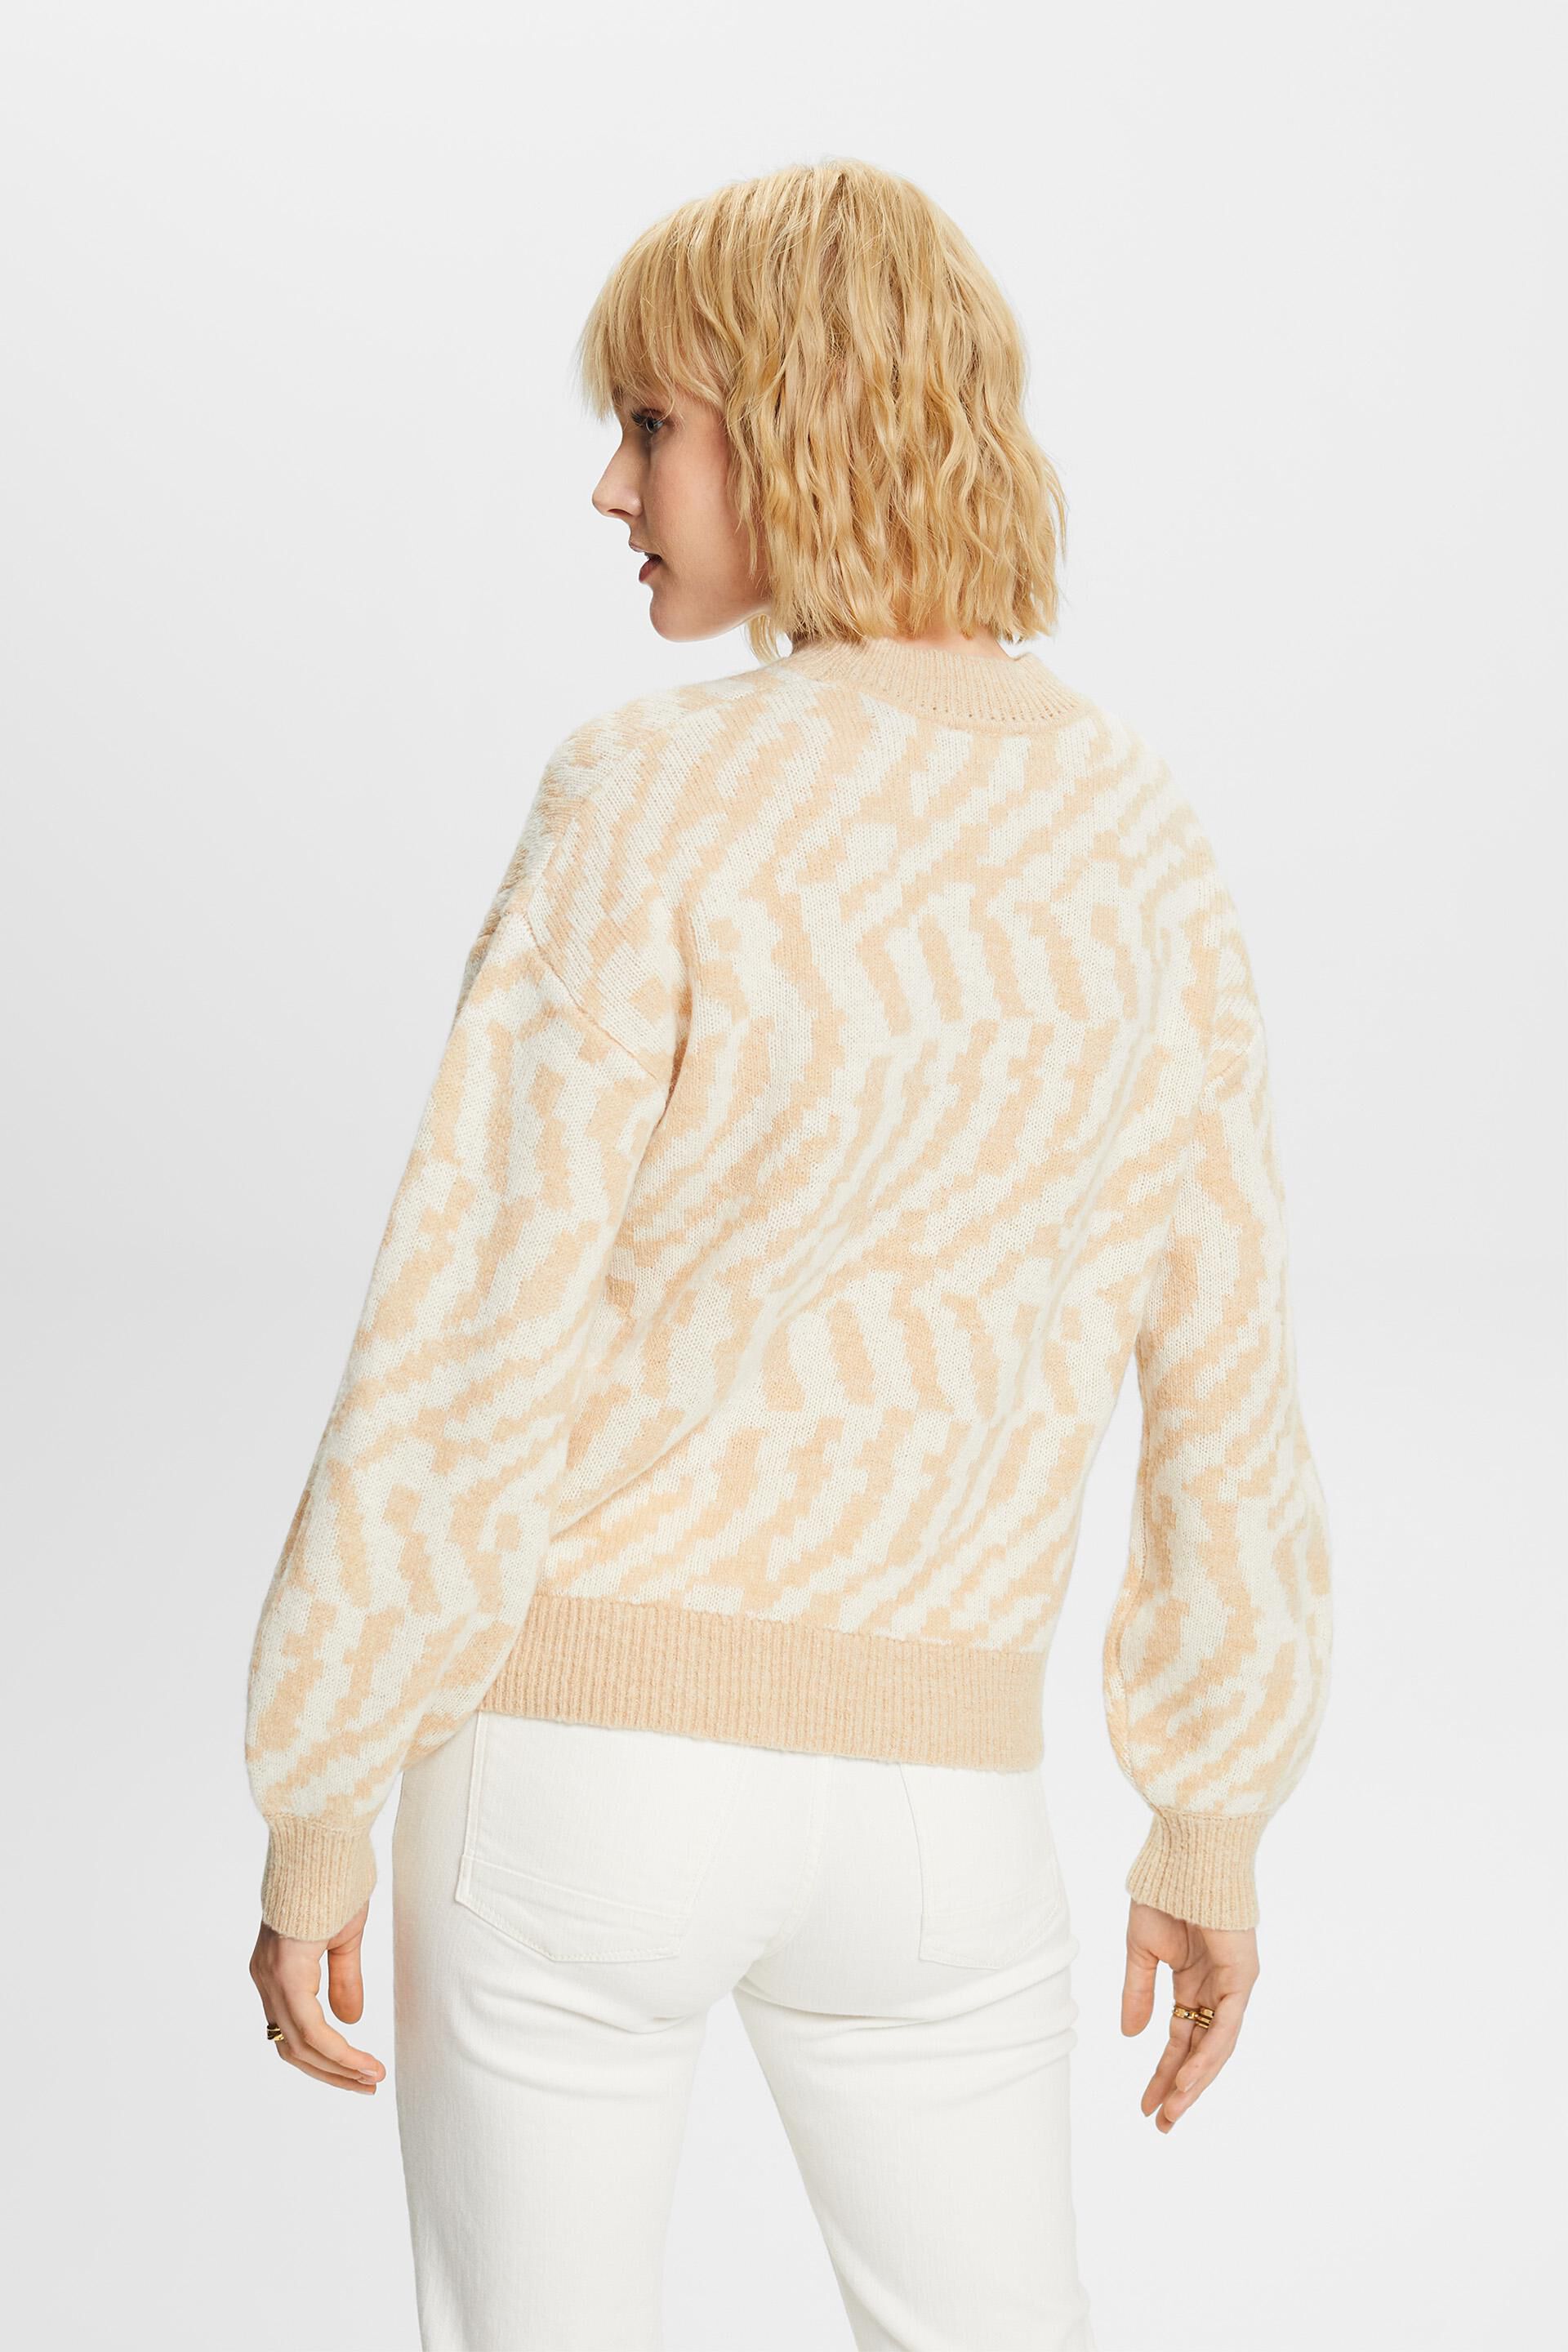 ESPRIT - Short-sleeved jacquard rib sweater at our online shop